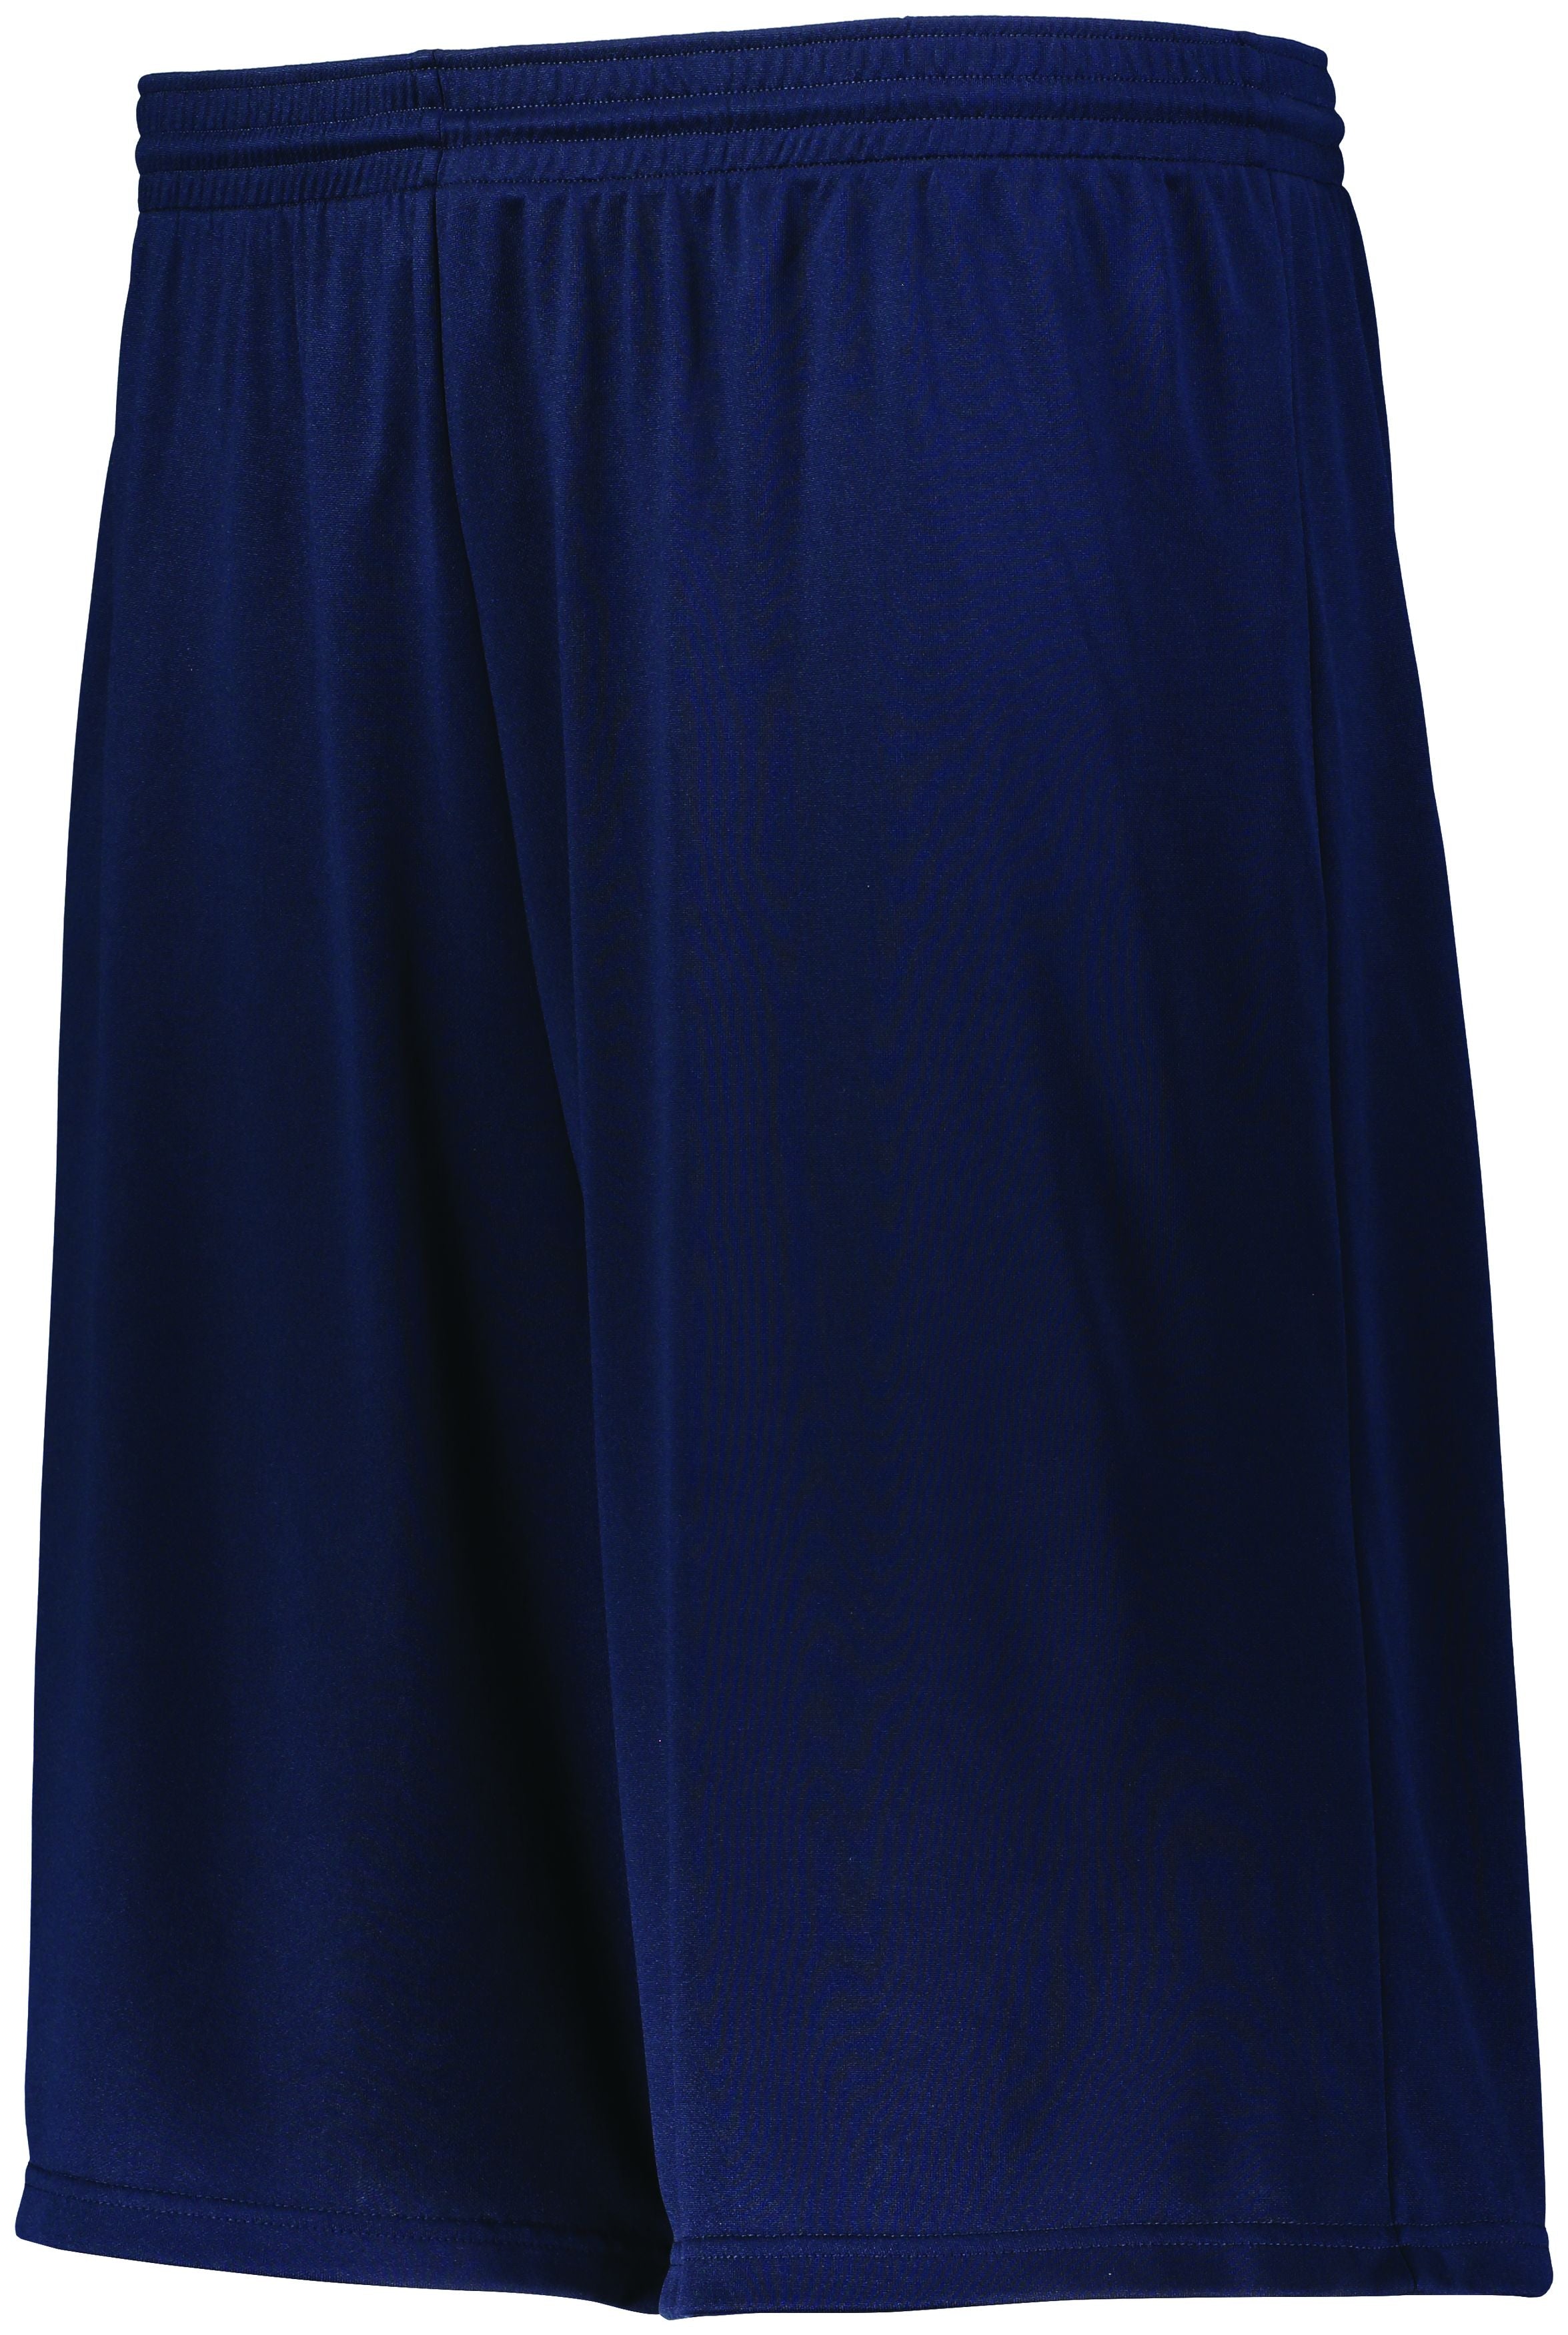 Augusta Sportswear Longer Length Attain Wicking Shorts in Navy  -Part of the Adult, Adult-Shorts, Augusta-Products product lines at KanaleyCreations.com